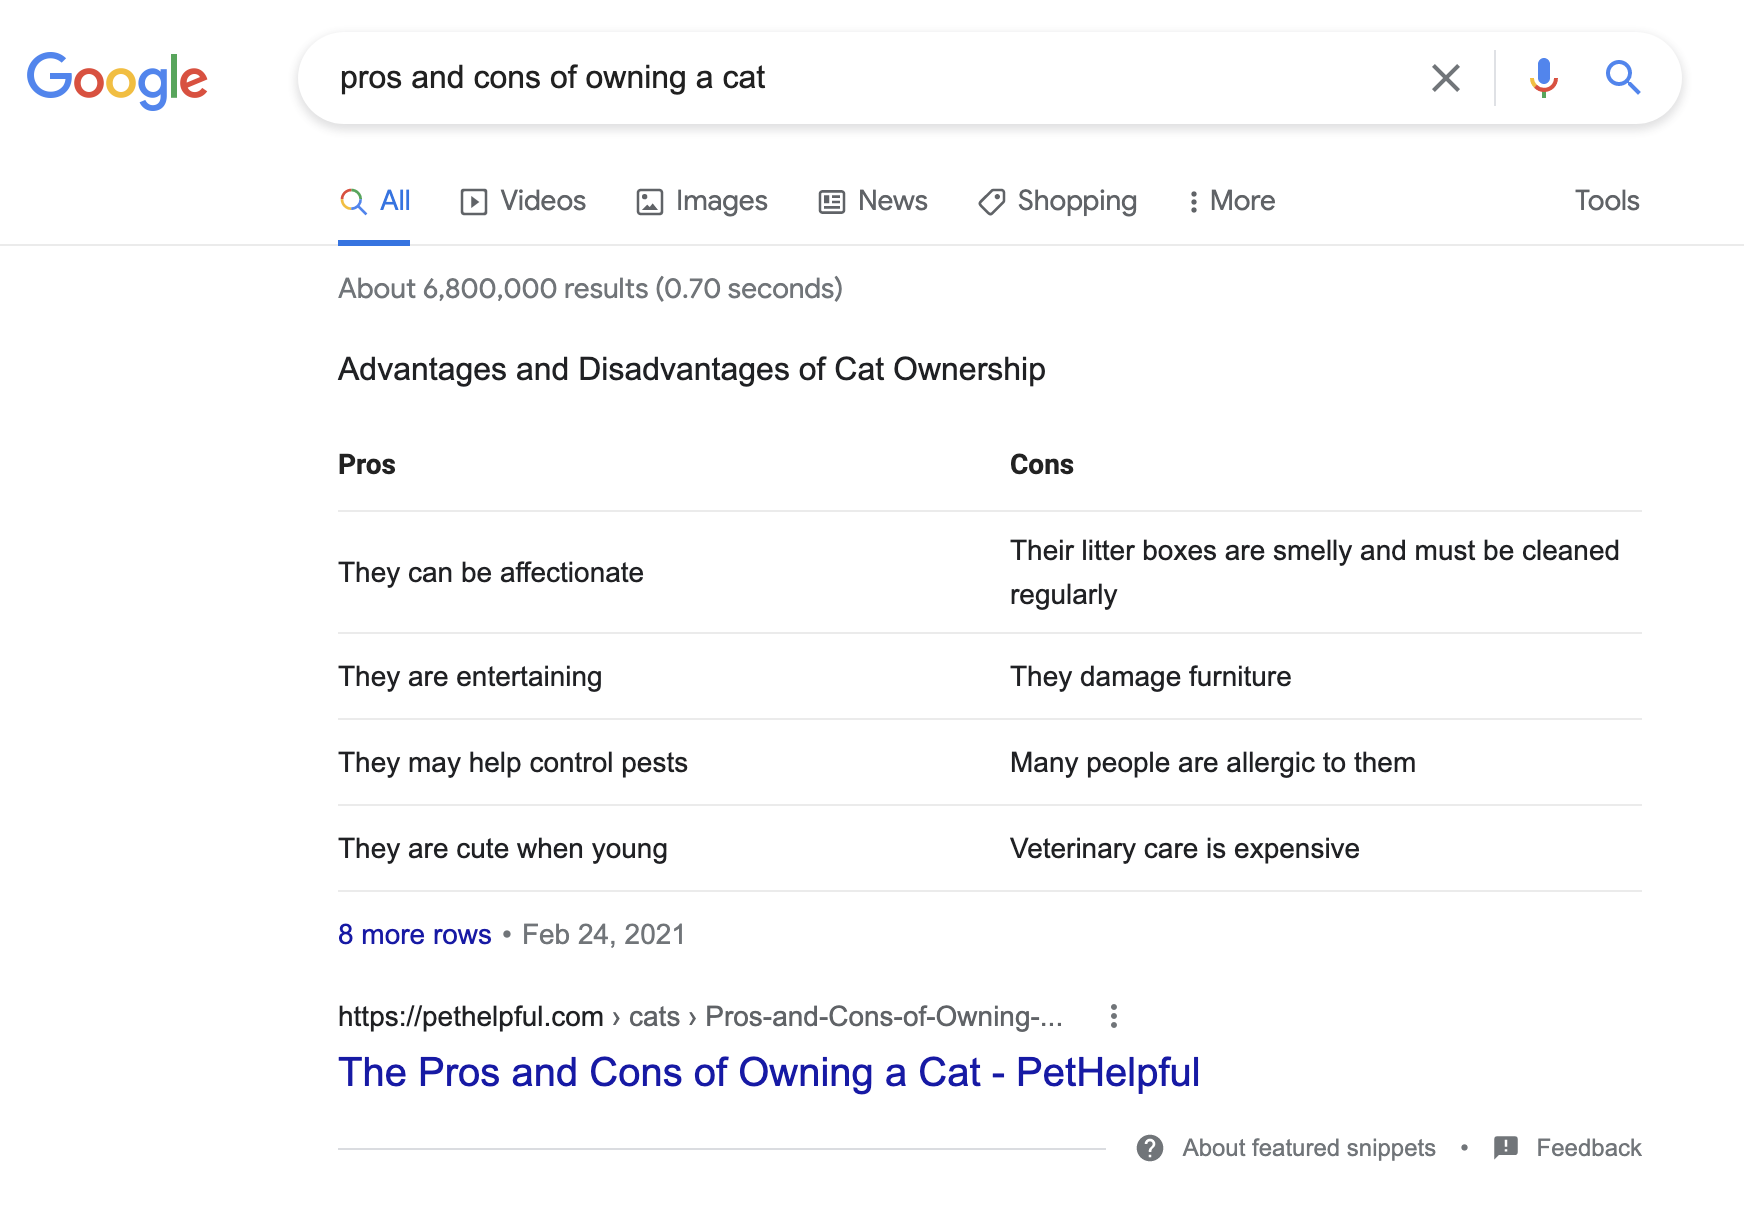 Google search results for pros and cons of owning a cat